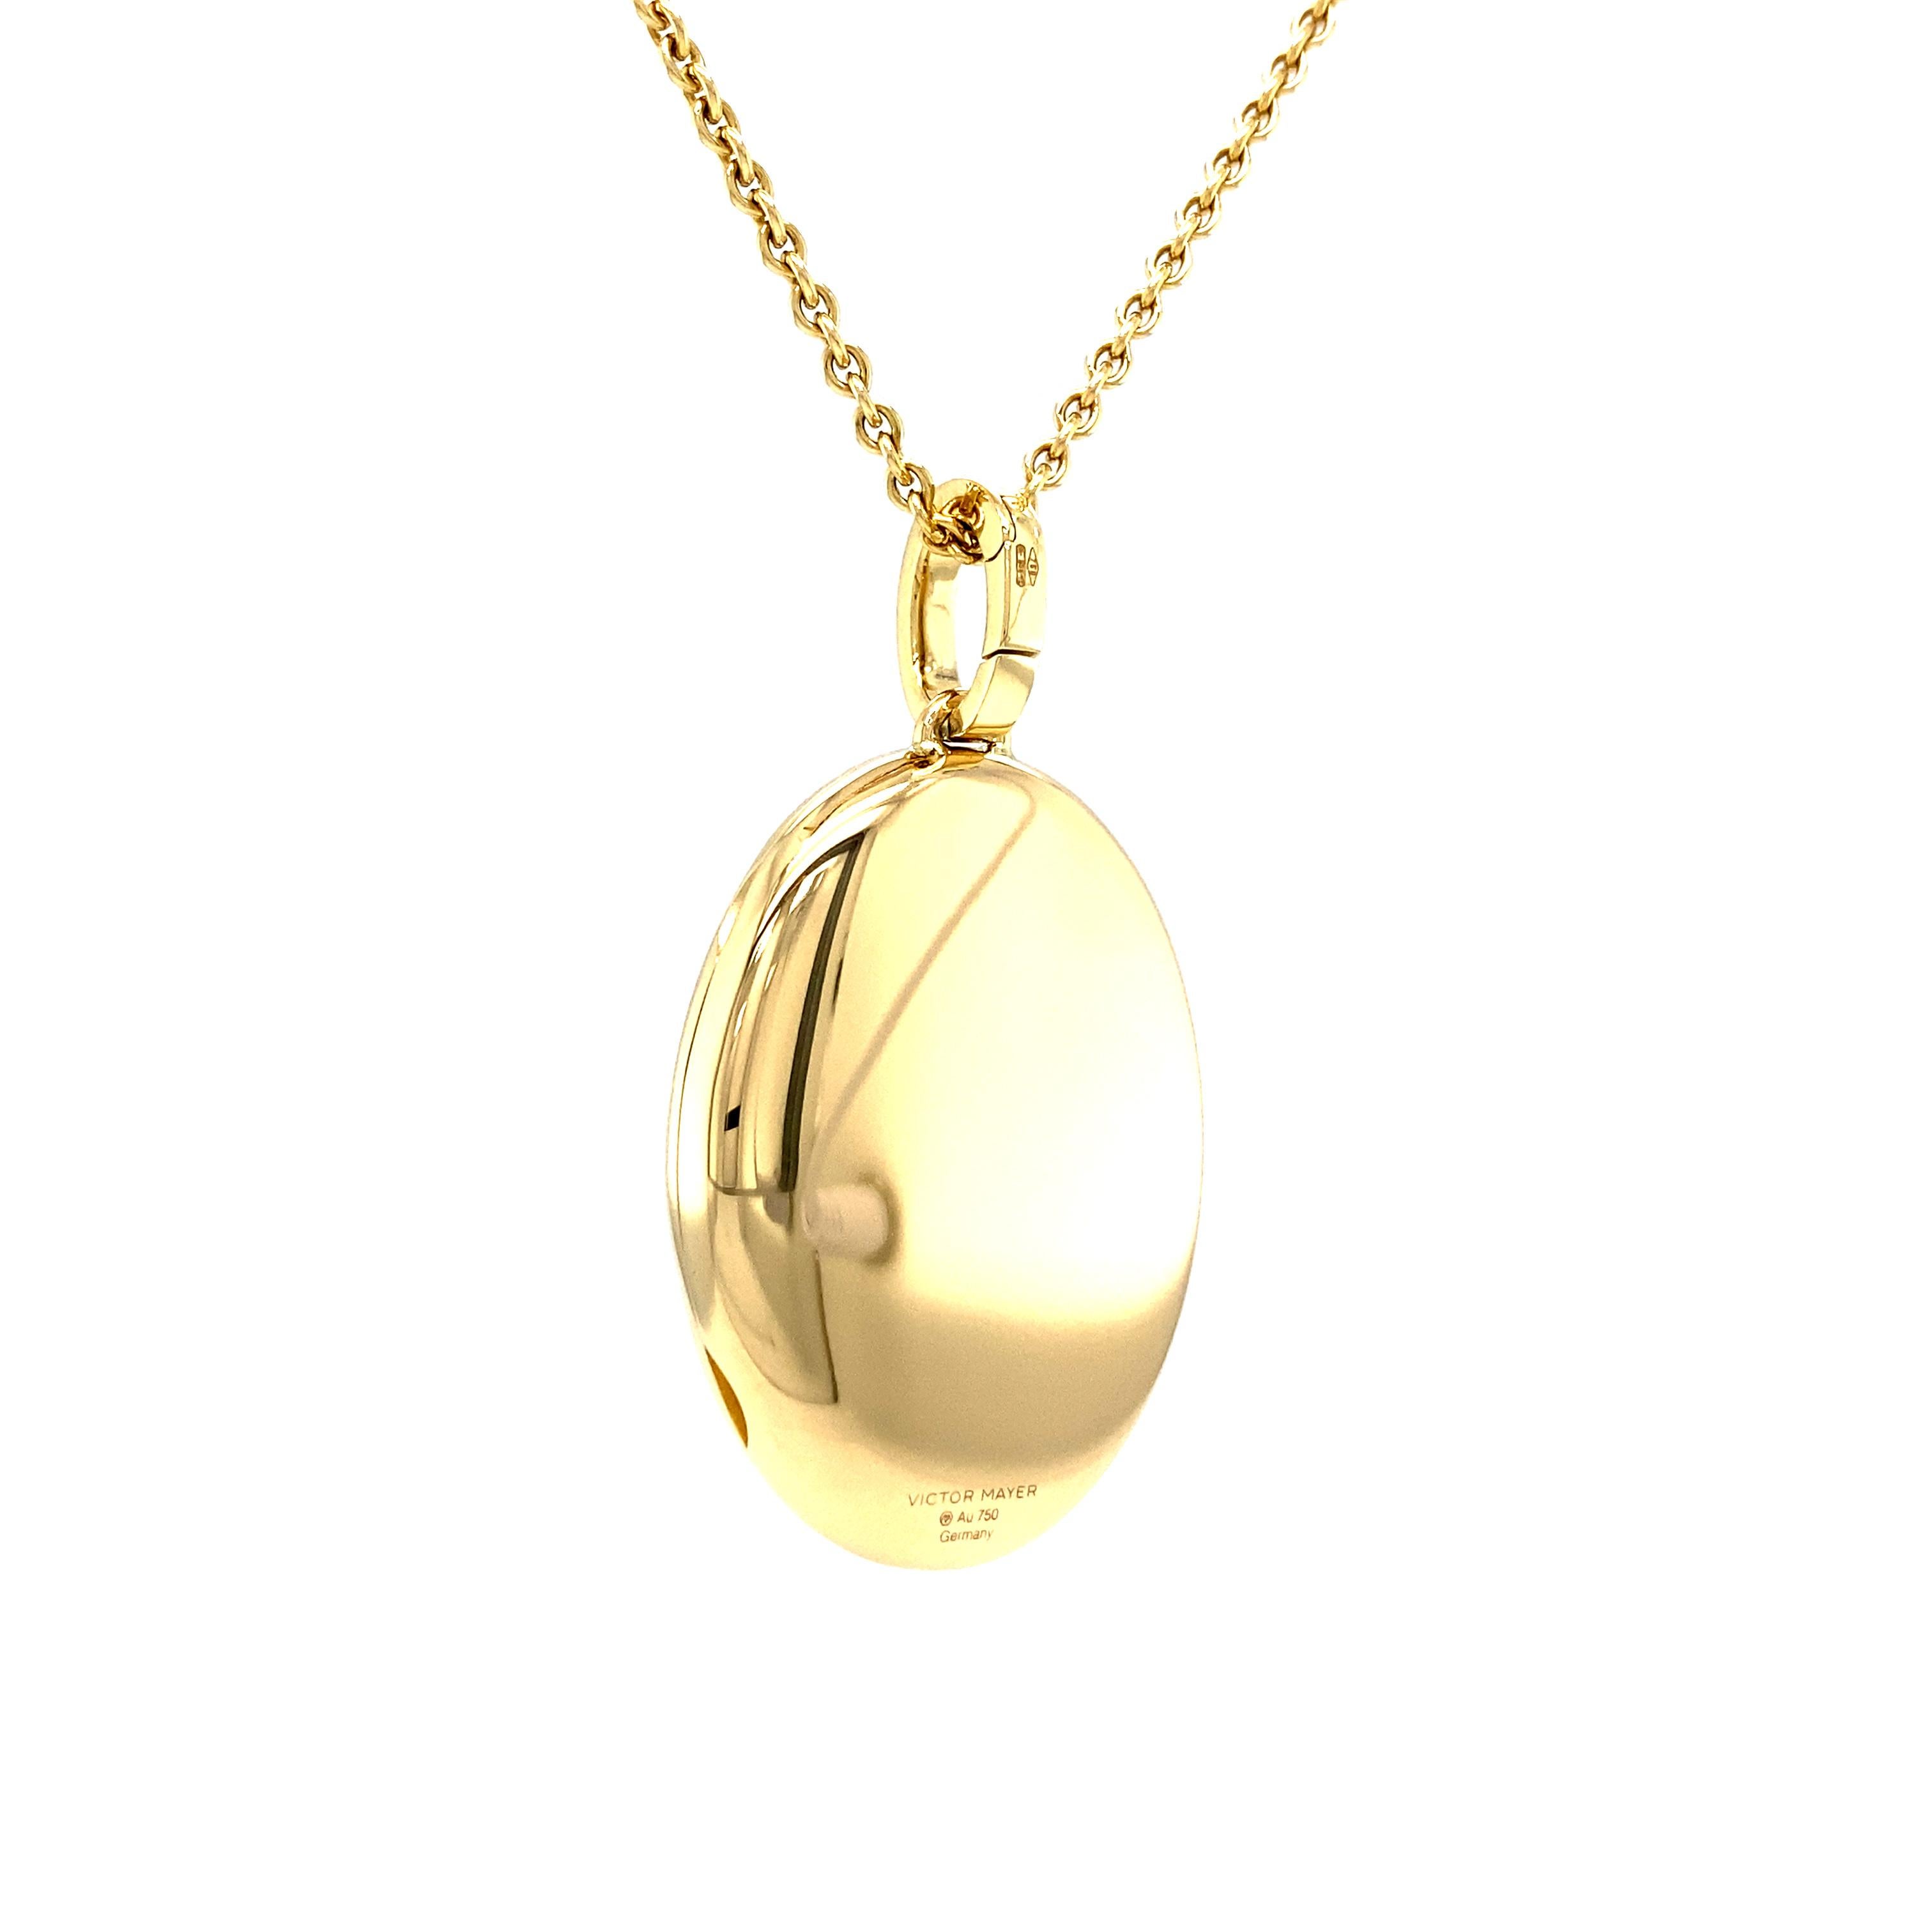 Oval Locket Pendant with Scroll Engraving - 18k Yellow Gold - 32.0 x 23.0 mm For Sale 2